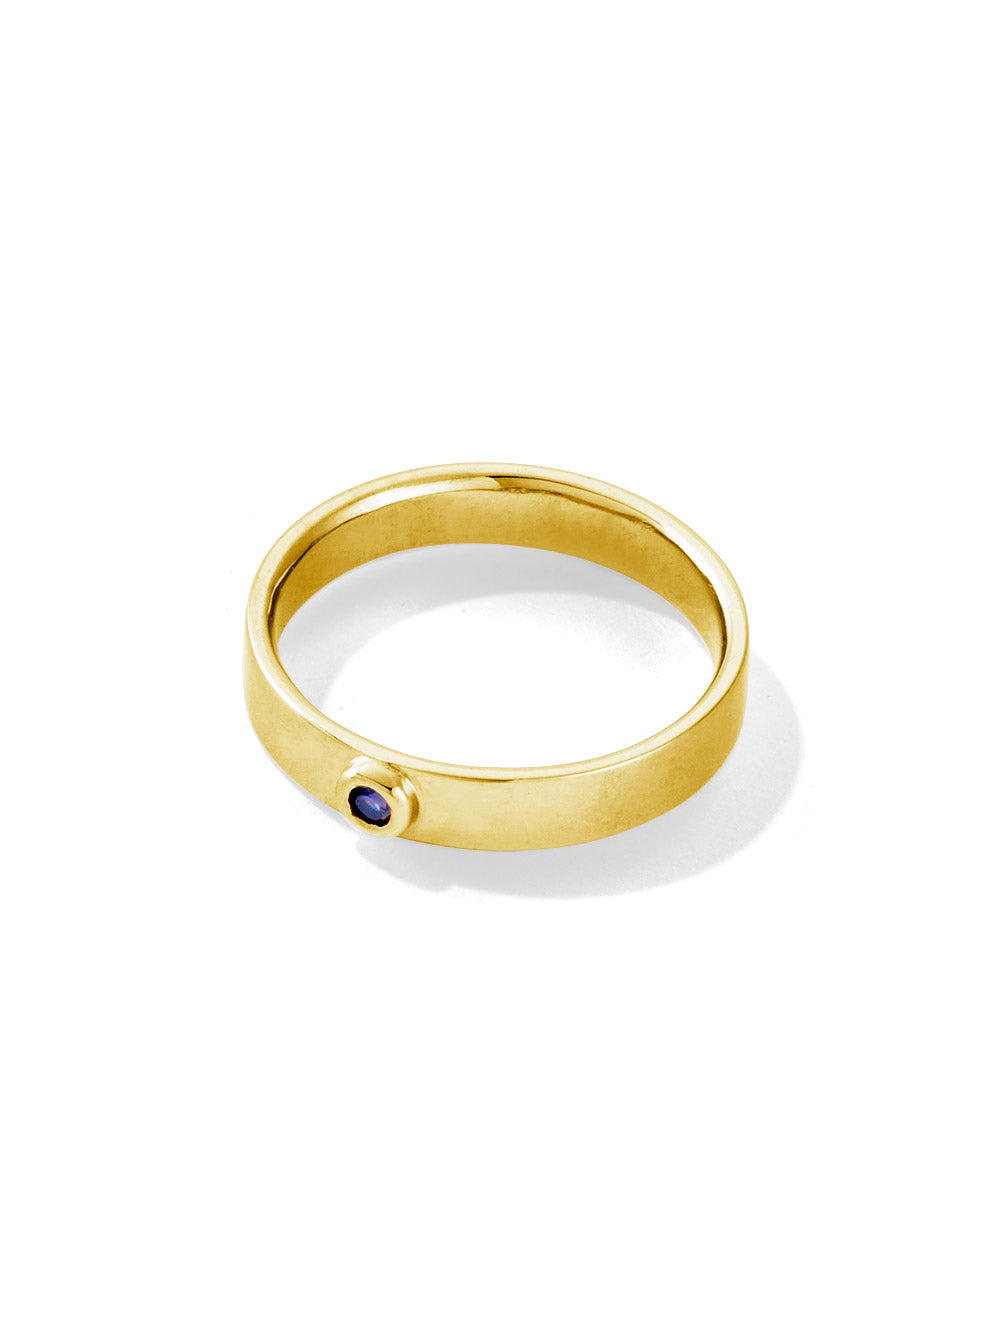 loyal + wise ring | blue sapphire